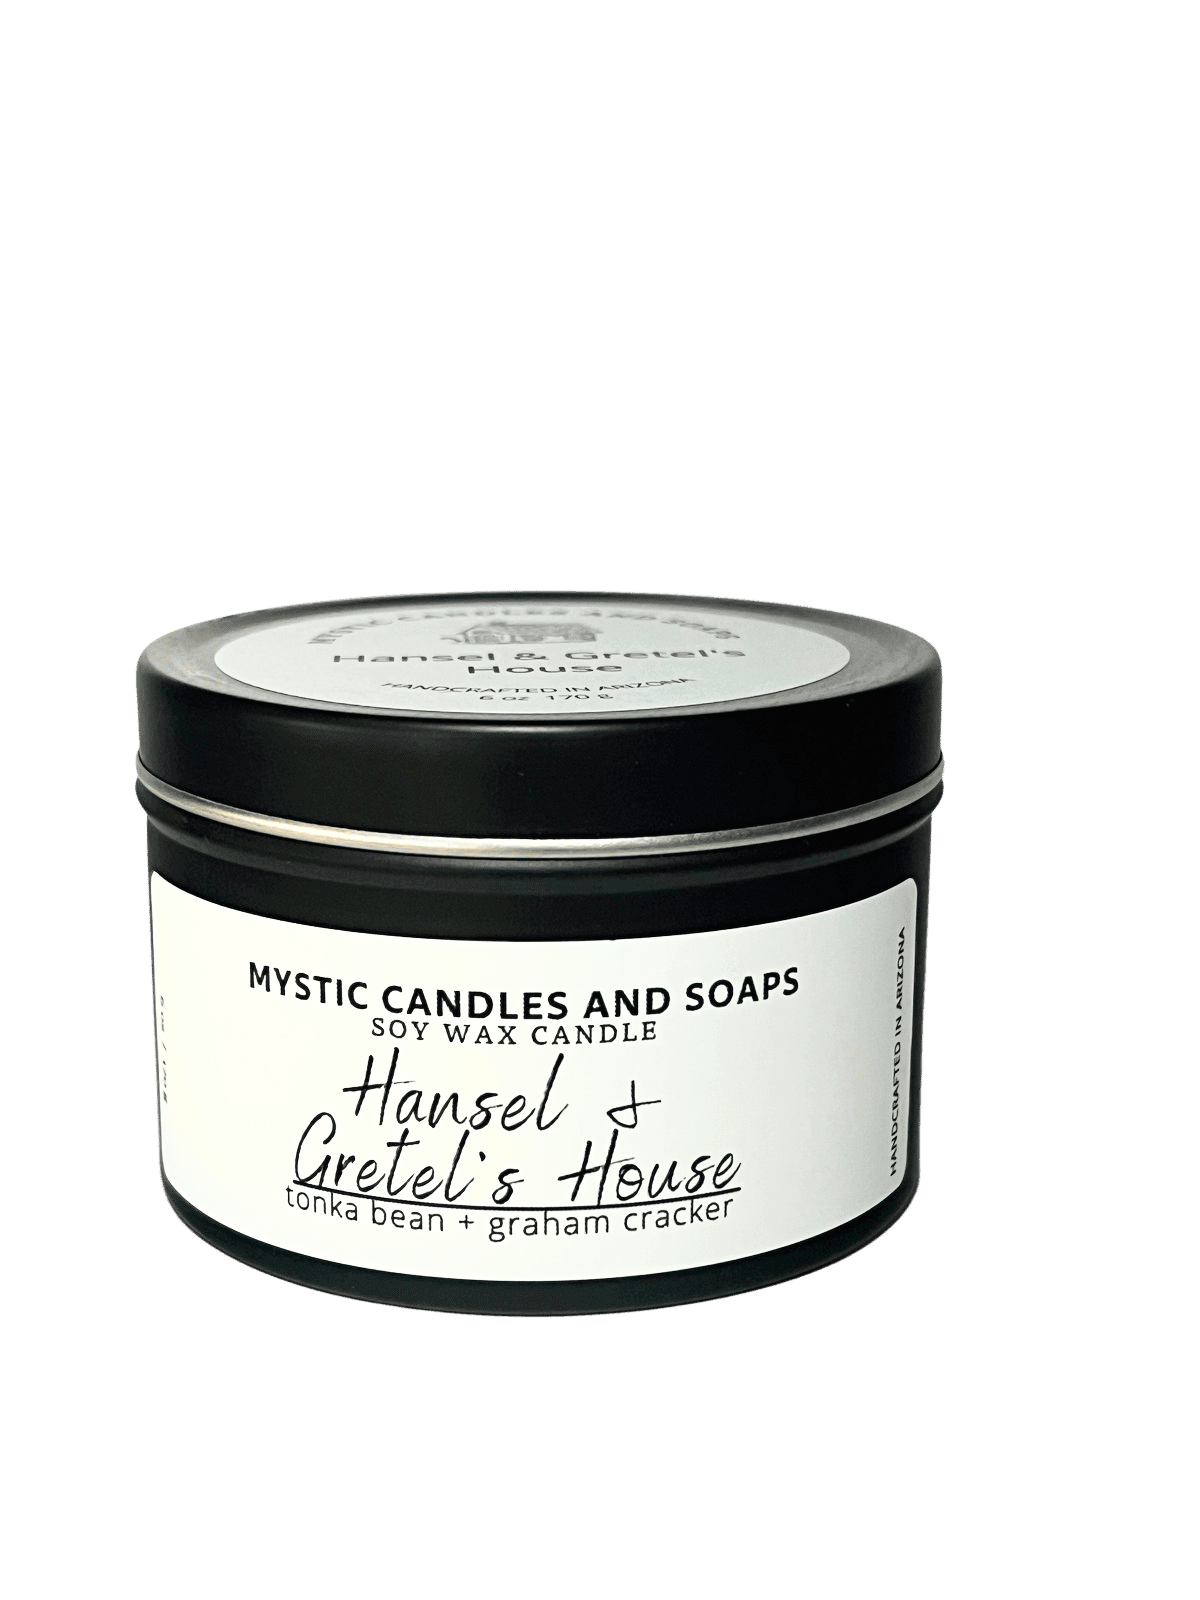 Hansel & Gretel's House Candle - Mystic Candles and Soaps LLC